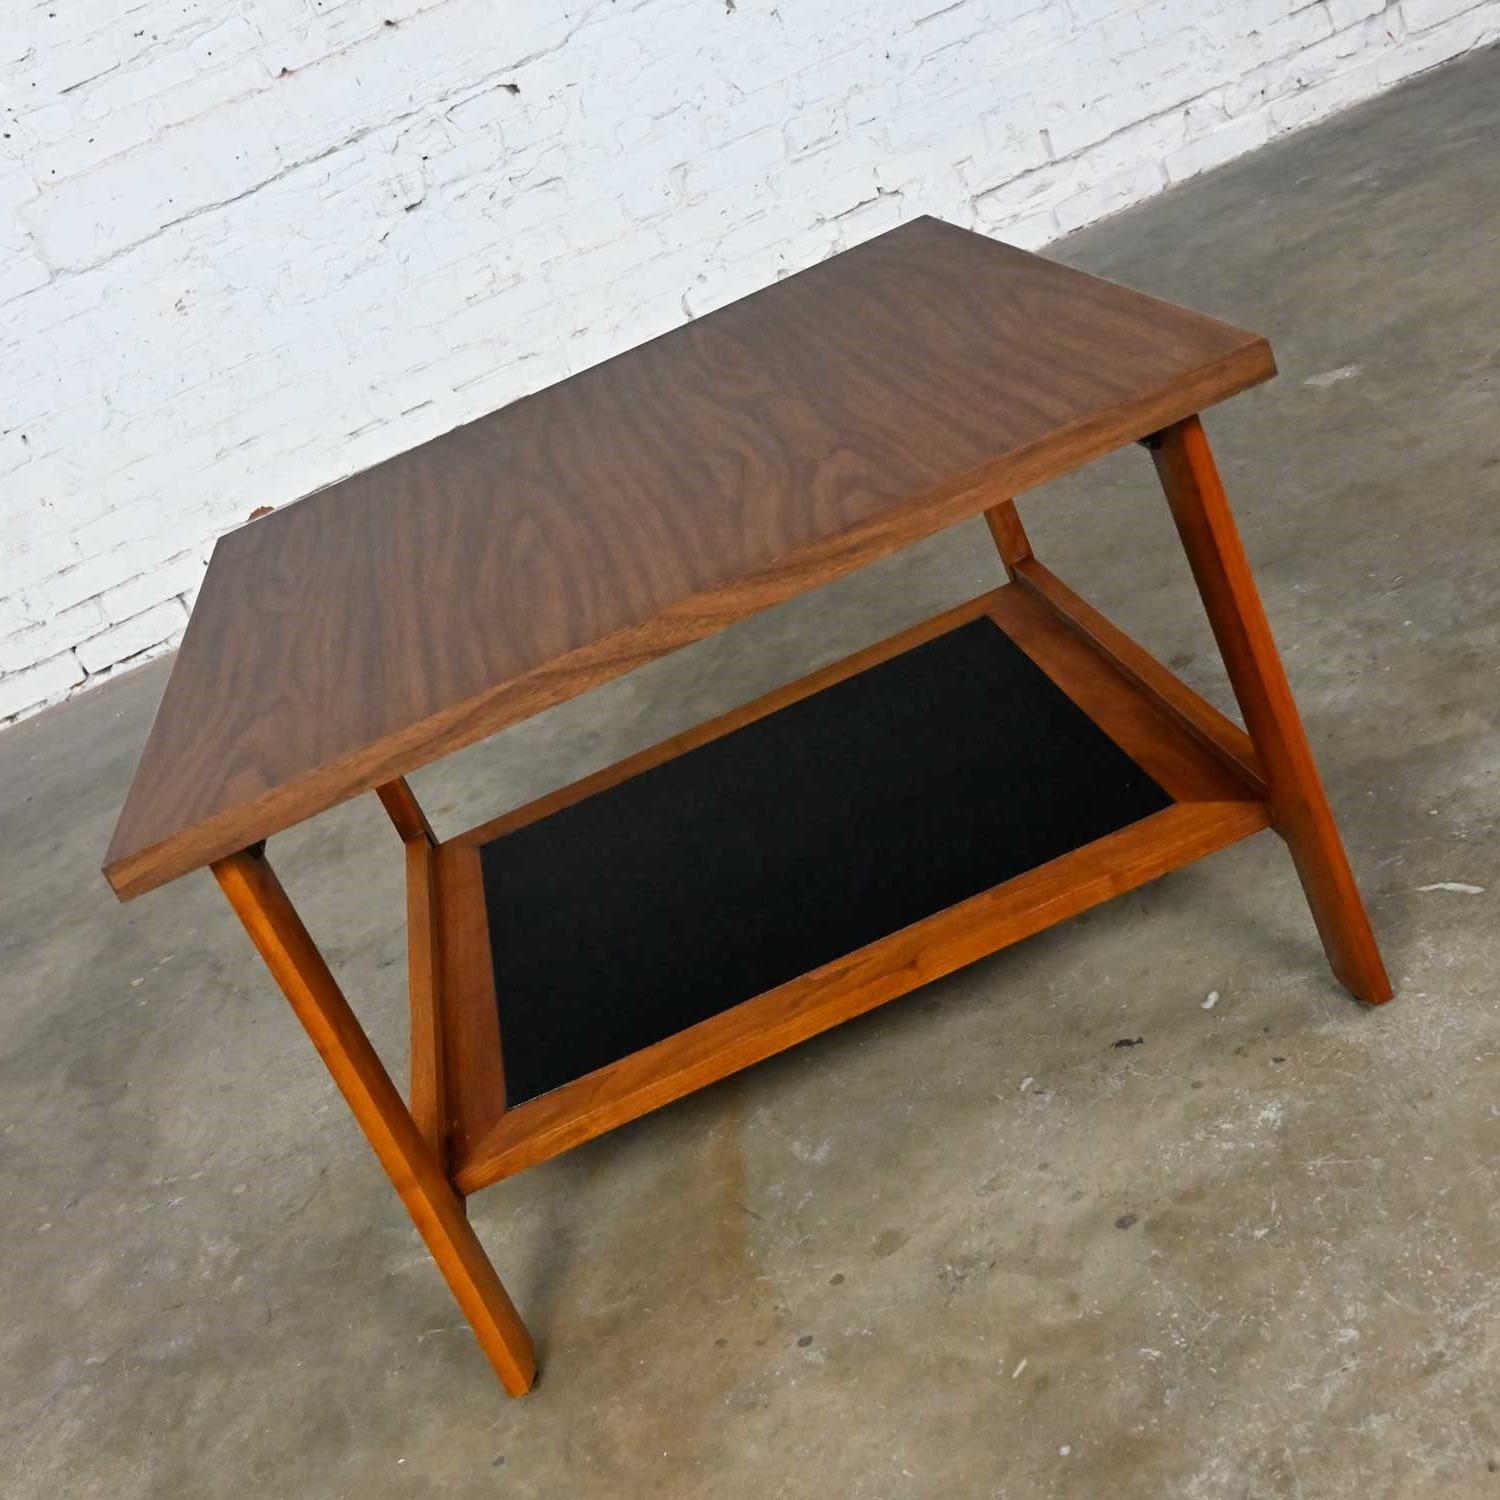 MCM Square Walnut End Table Lower Shelf Black Faux Leather Insert Laminate Top In Good Condition For Sale In Topeka, KS